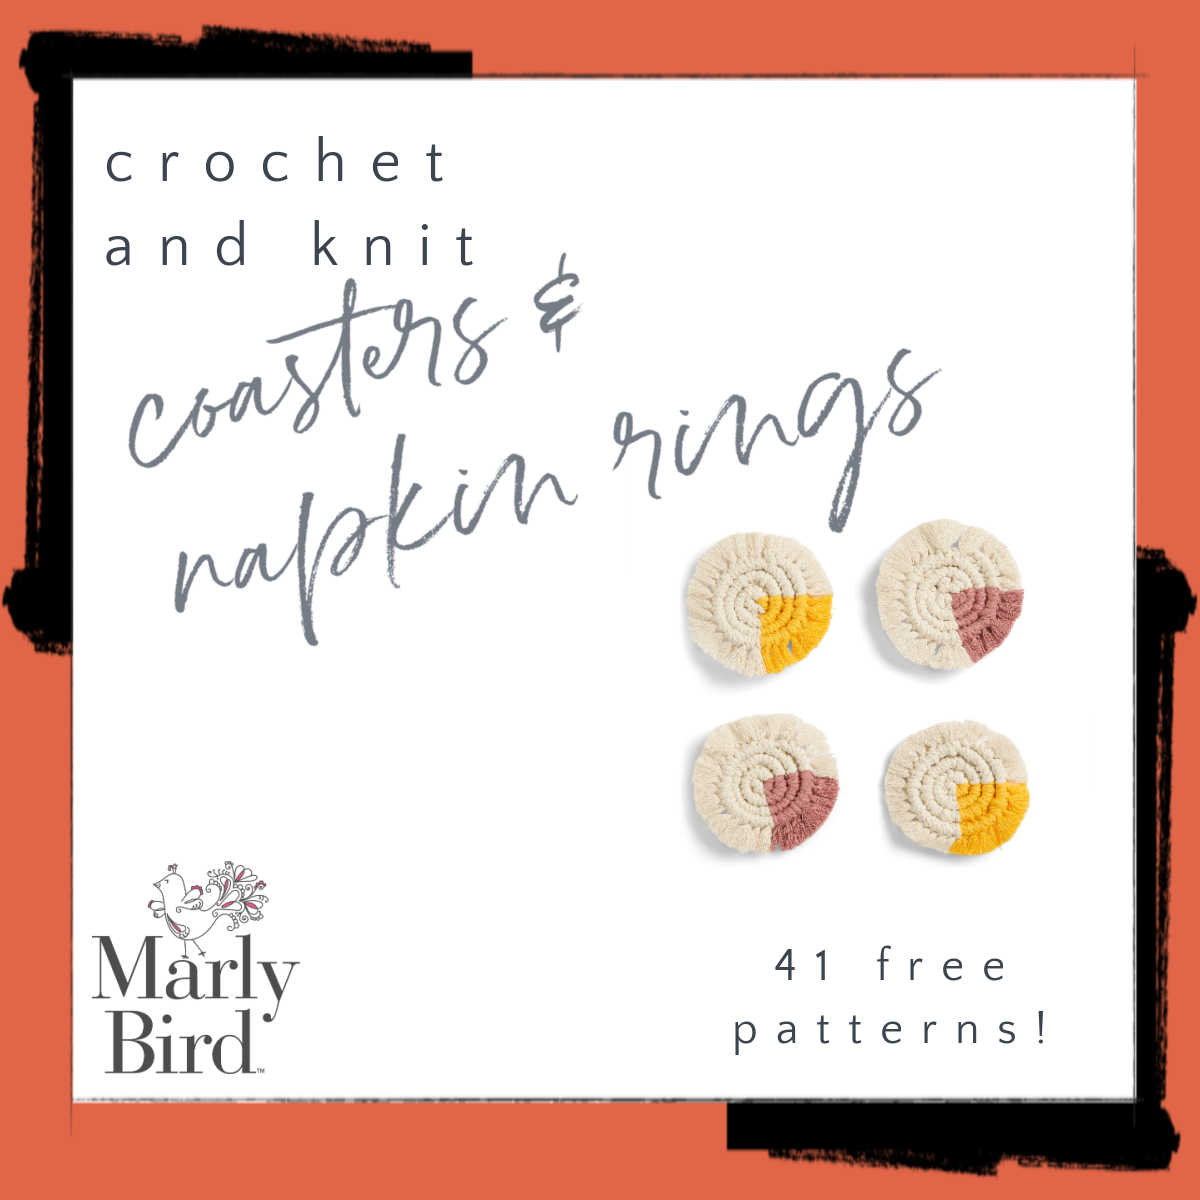 Knit and crochet coaster and napkin ring patterns